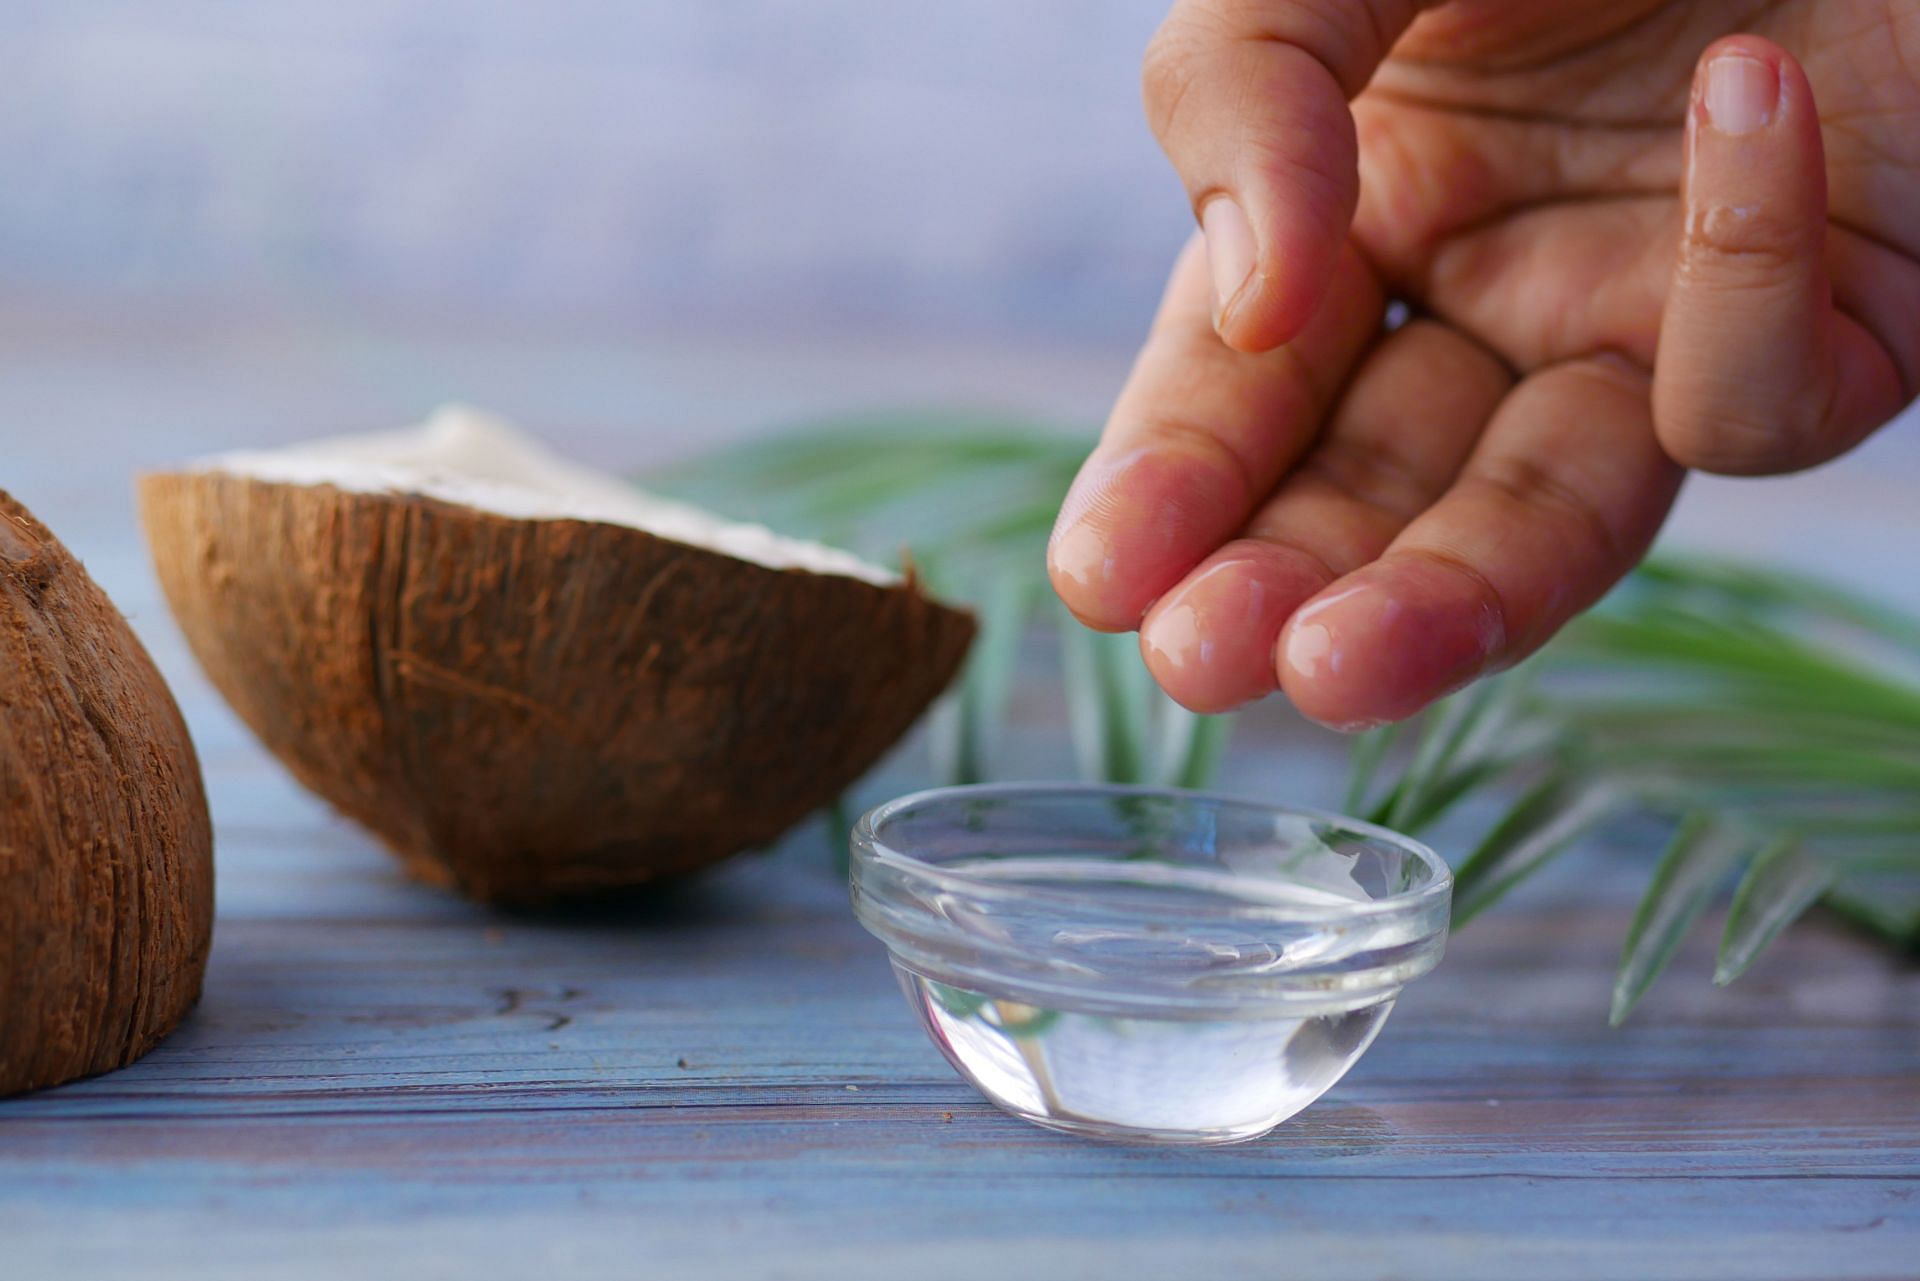 Coconut oil can also be used to provide relief from yeast infection. (Image via Pexels/Towfiqu Barbhuiya)